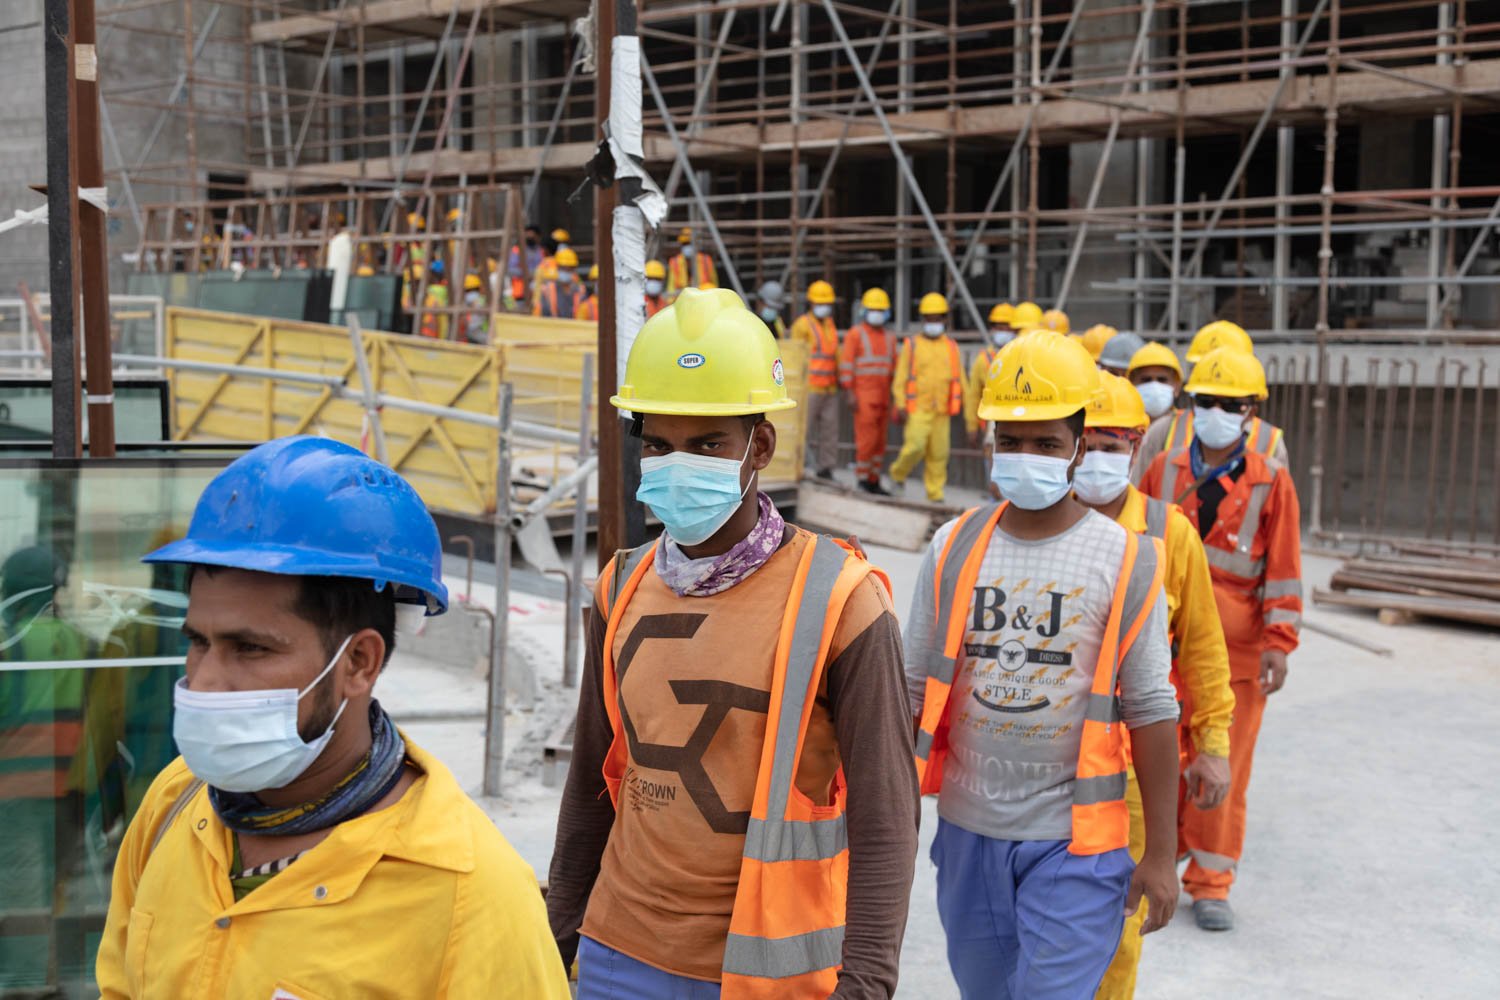  Workers at a construction site in Doha line up to get into buses to head to their sleeping quarters in order to rest during the mid-day heat on August 17, 2022. 